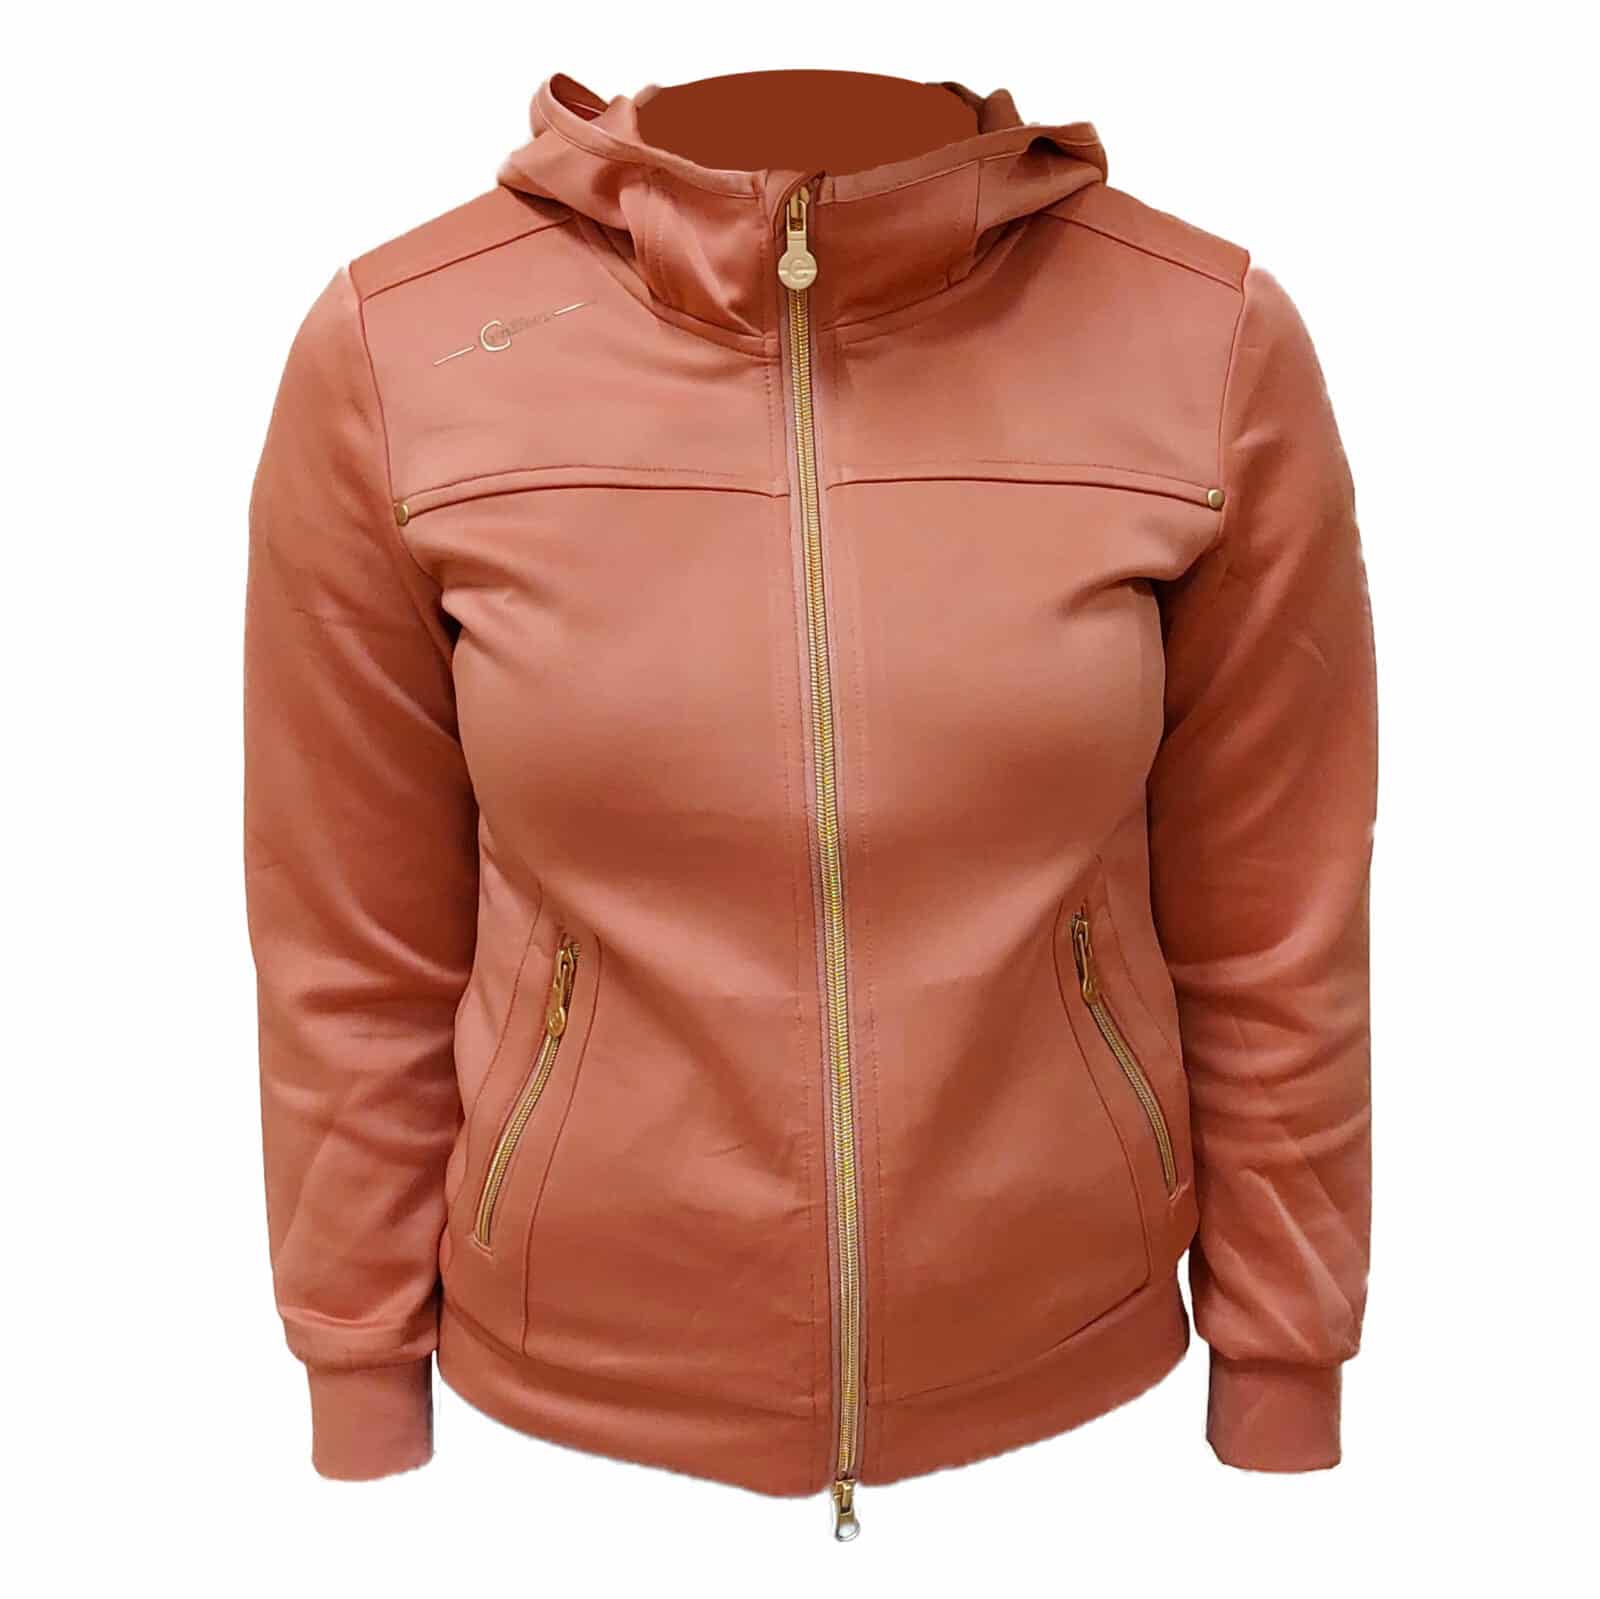 jacke_lachs_front